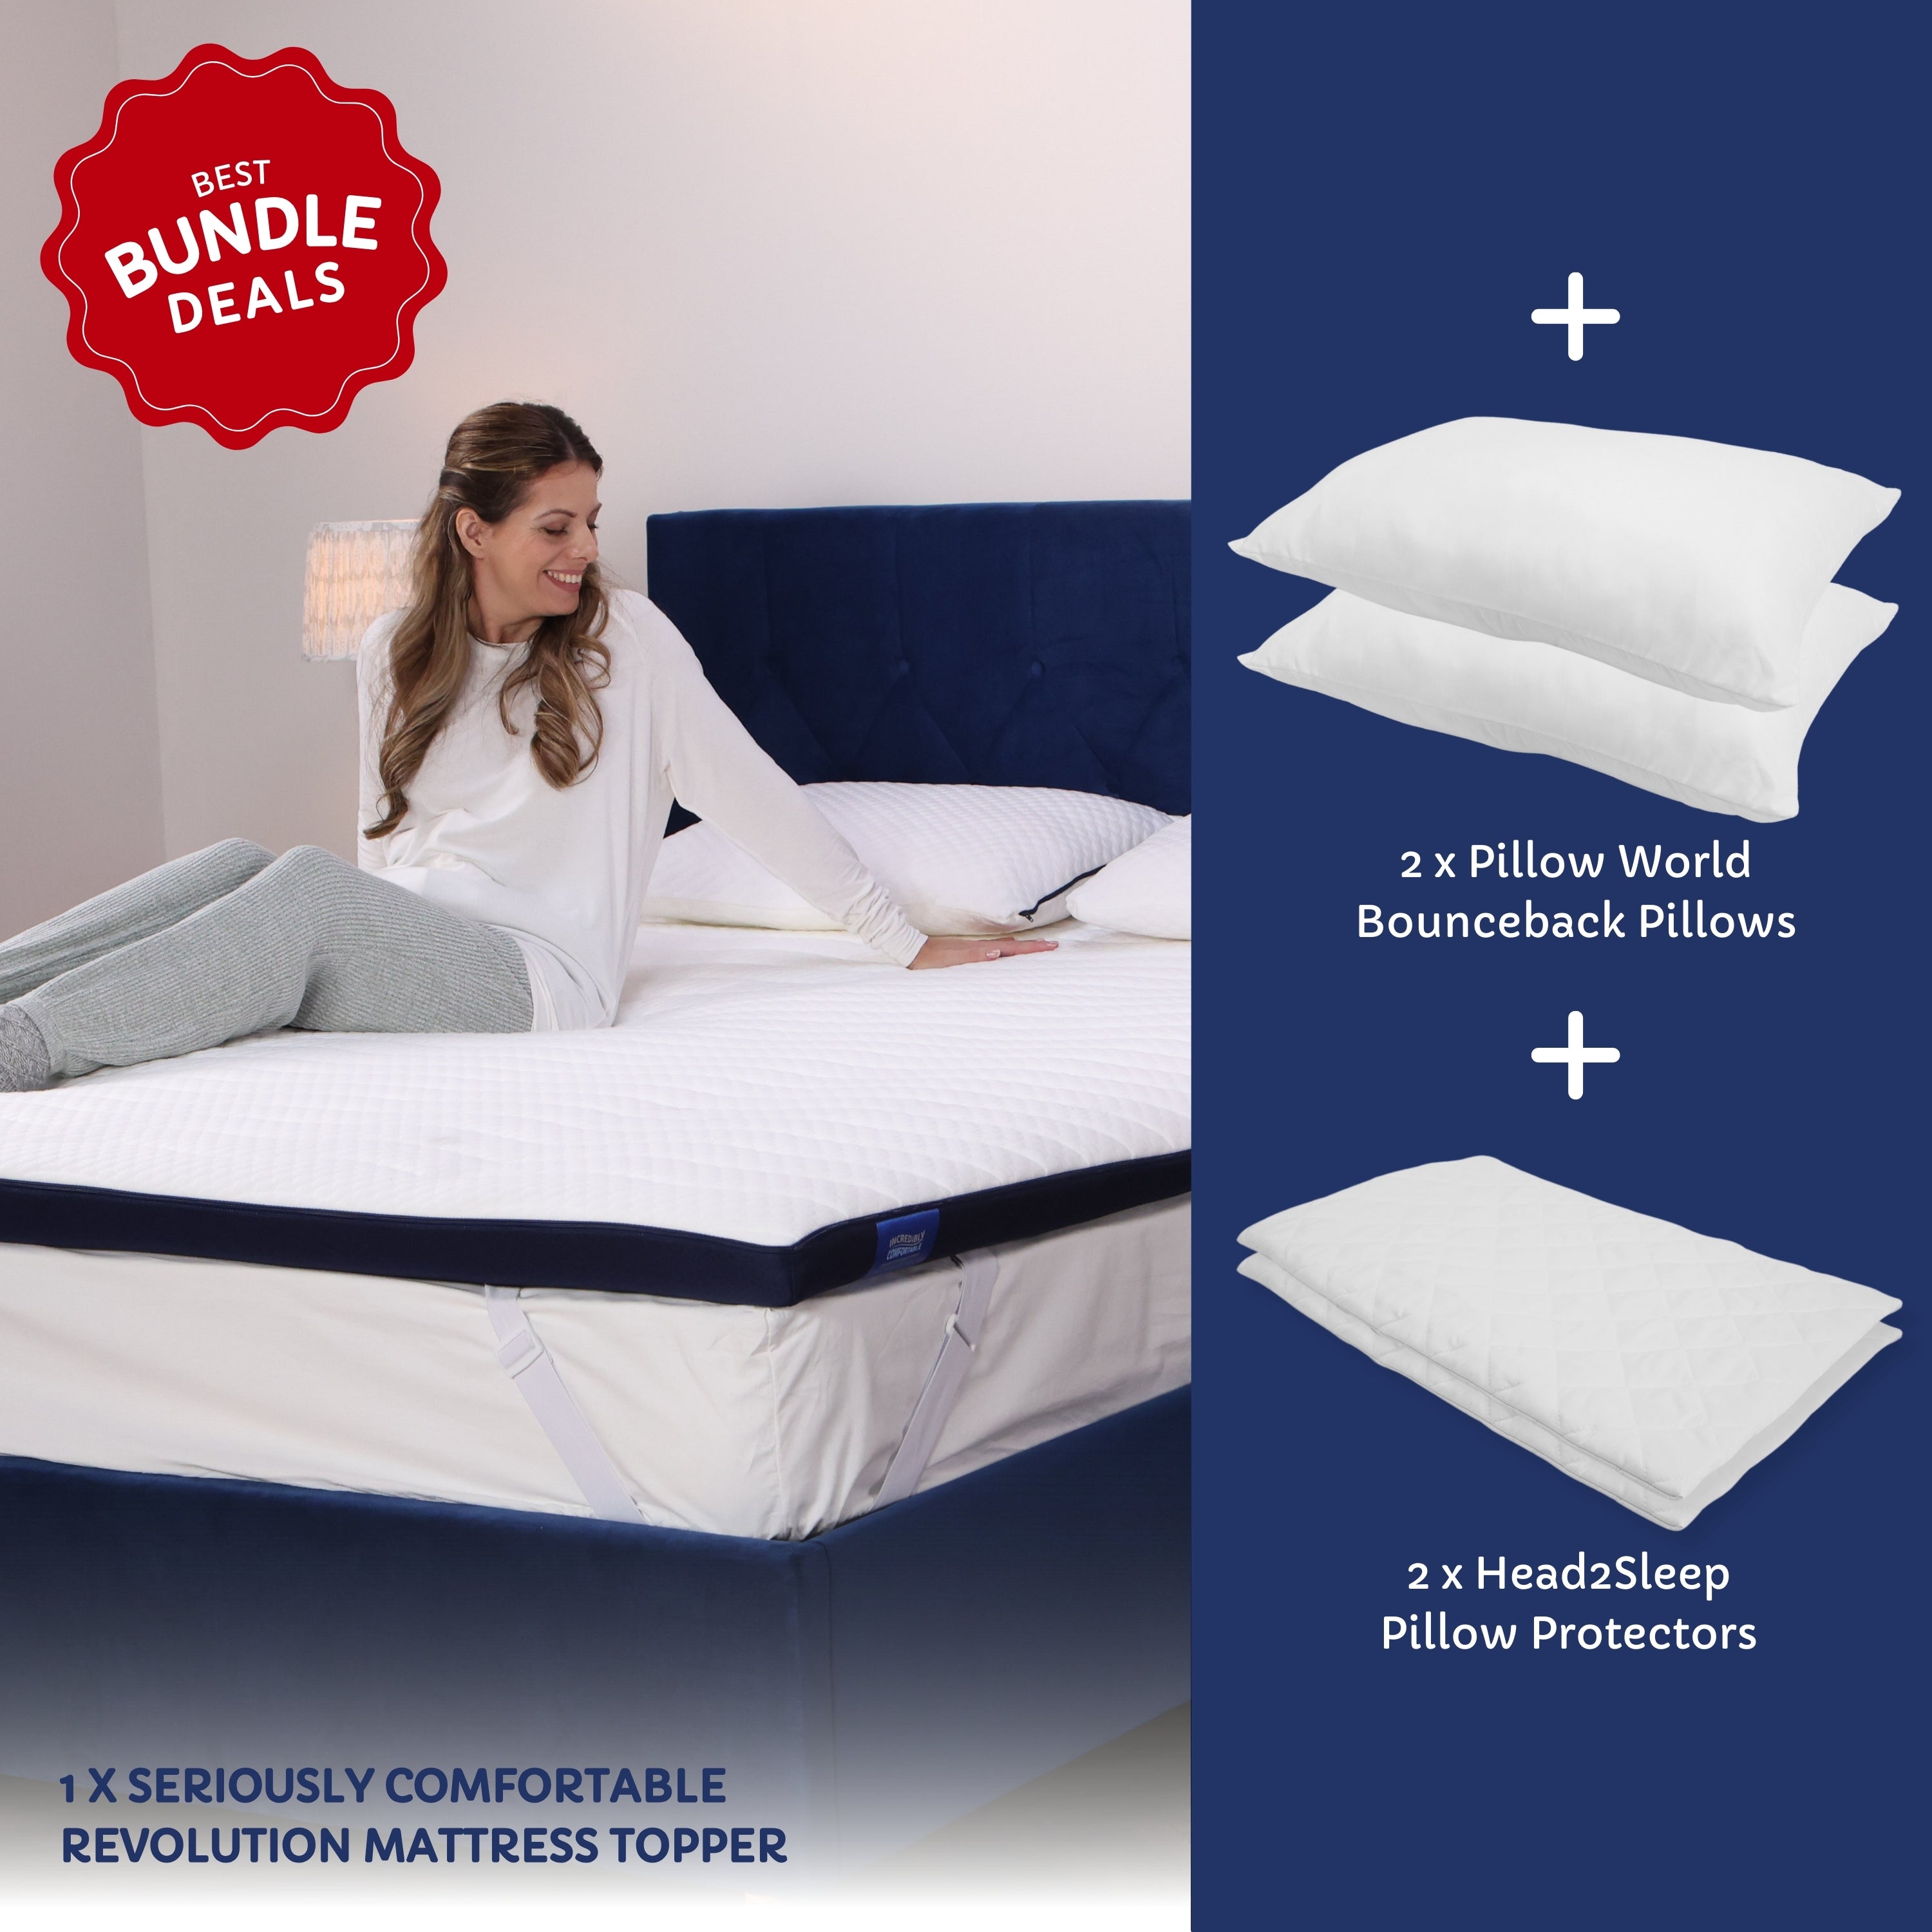 Ultimate Luxury Bundle - Mattress Topper with Pillows and Pillow Protectors